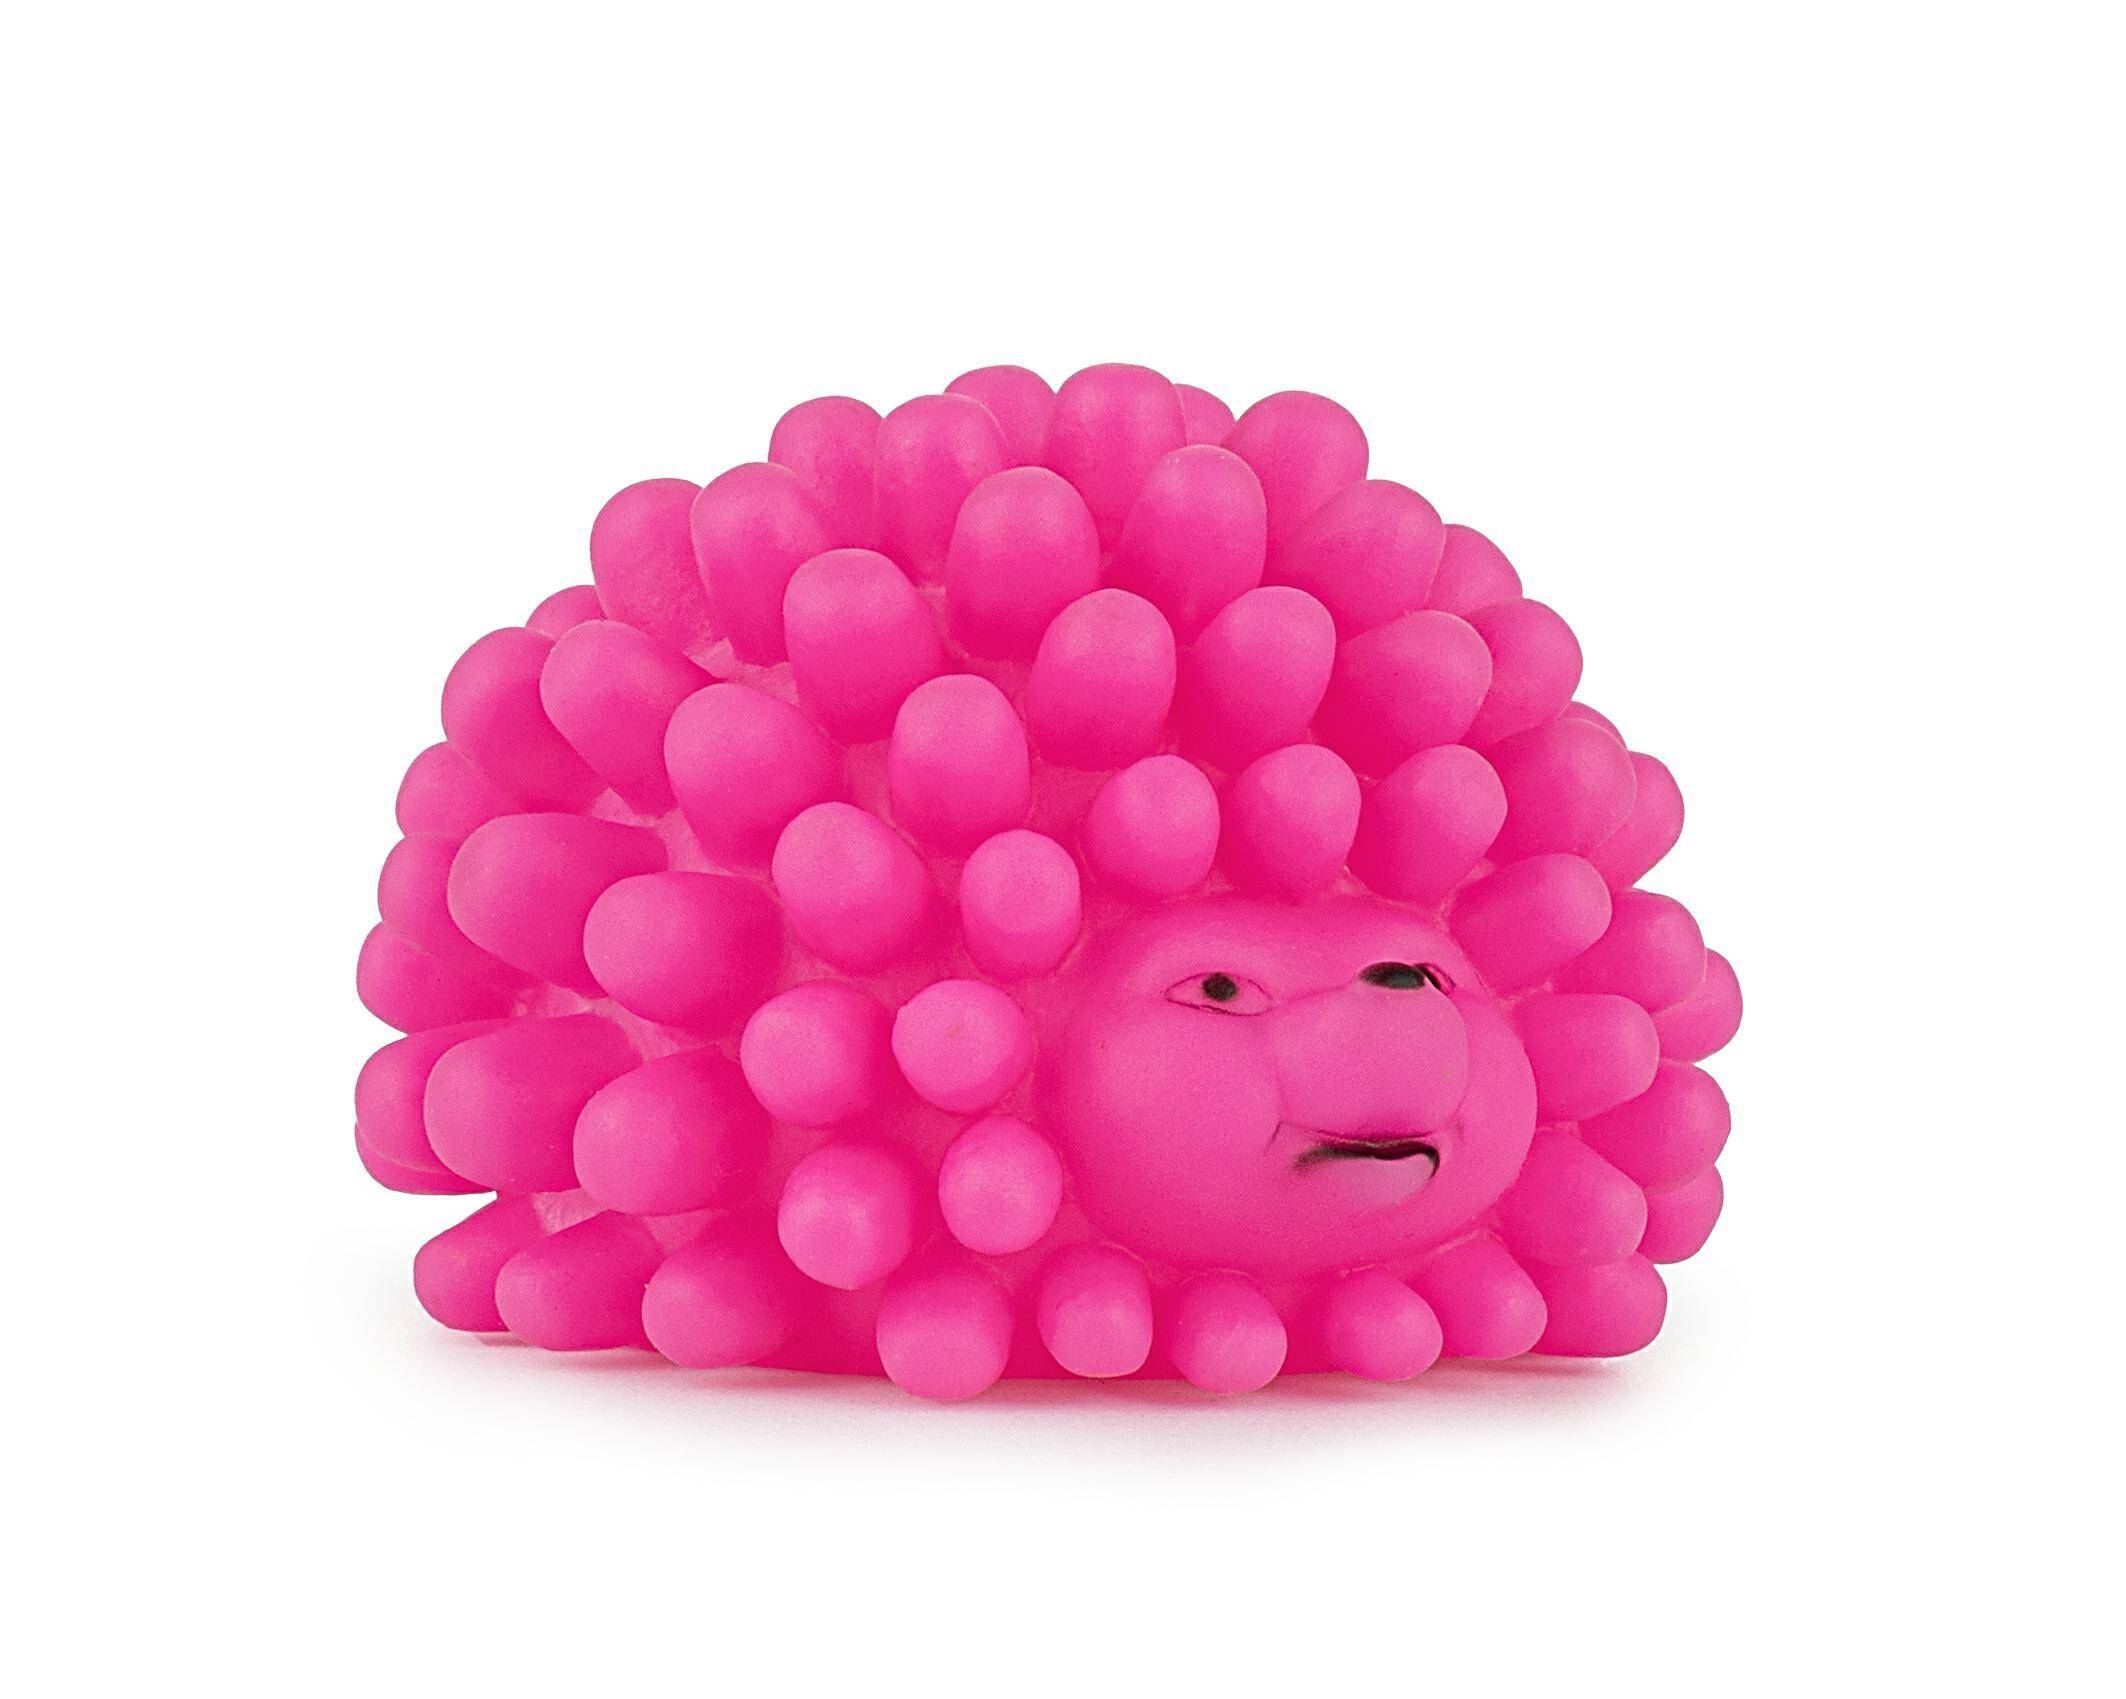 Z817 Squeaky toy with spikes